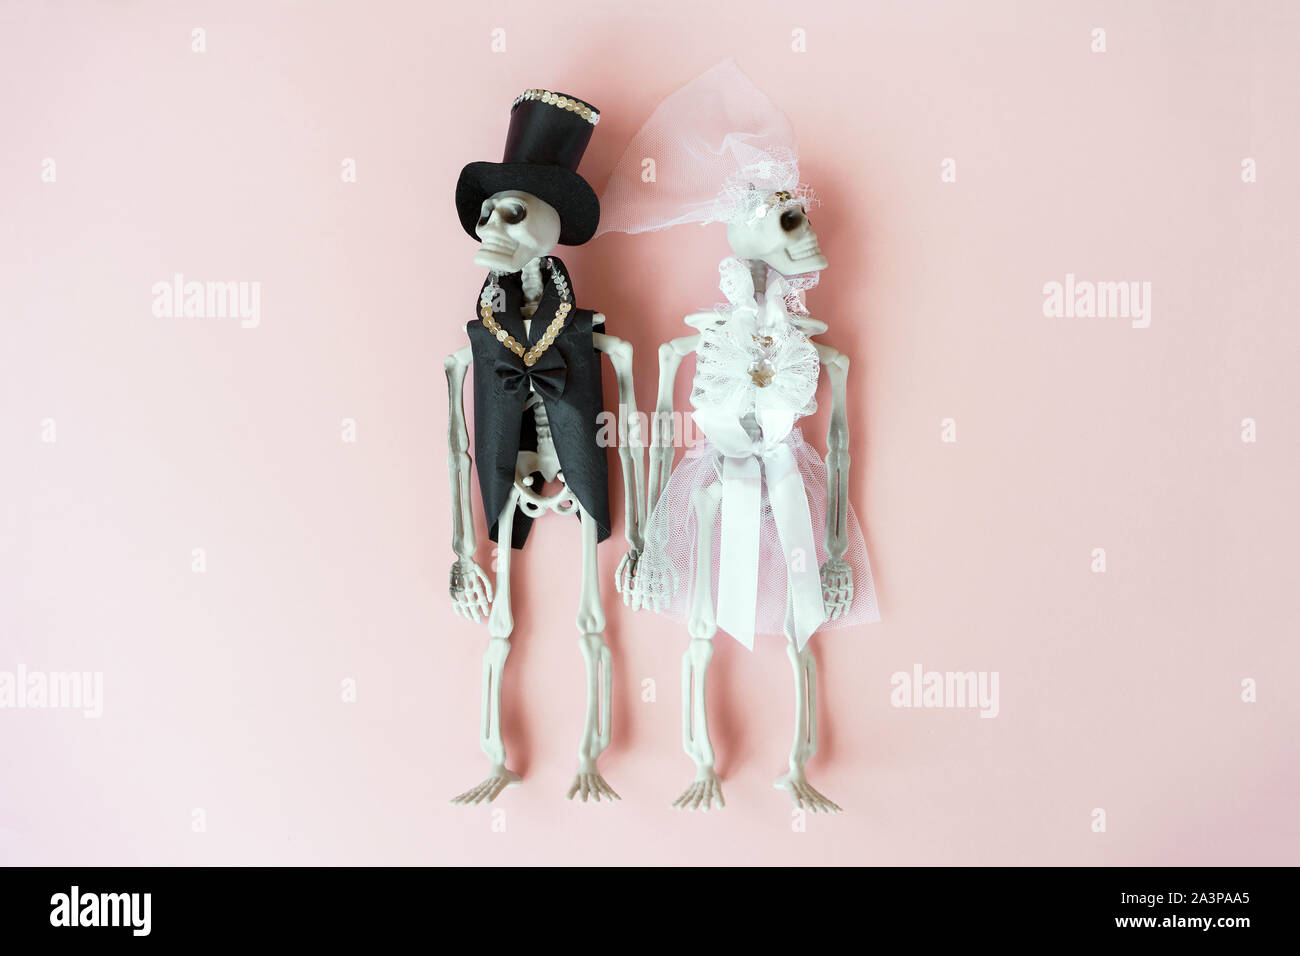 The skeletons in the bride groom wedding dress on the pale pink background. Stock Photo